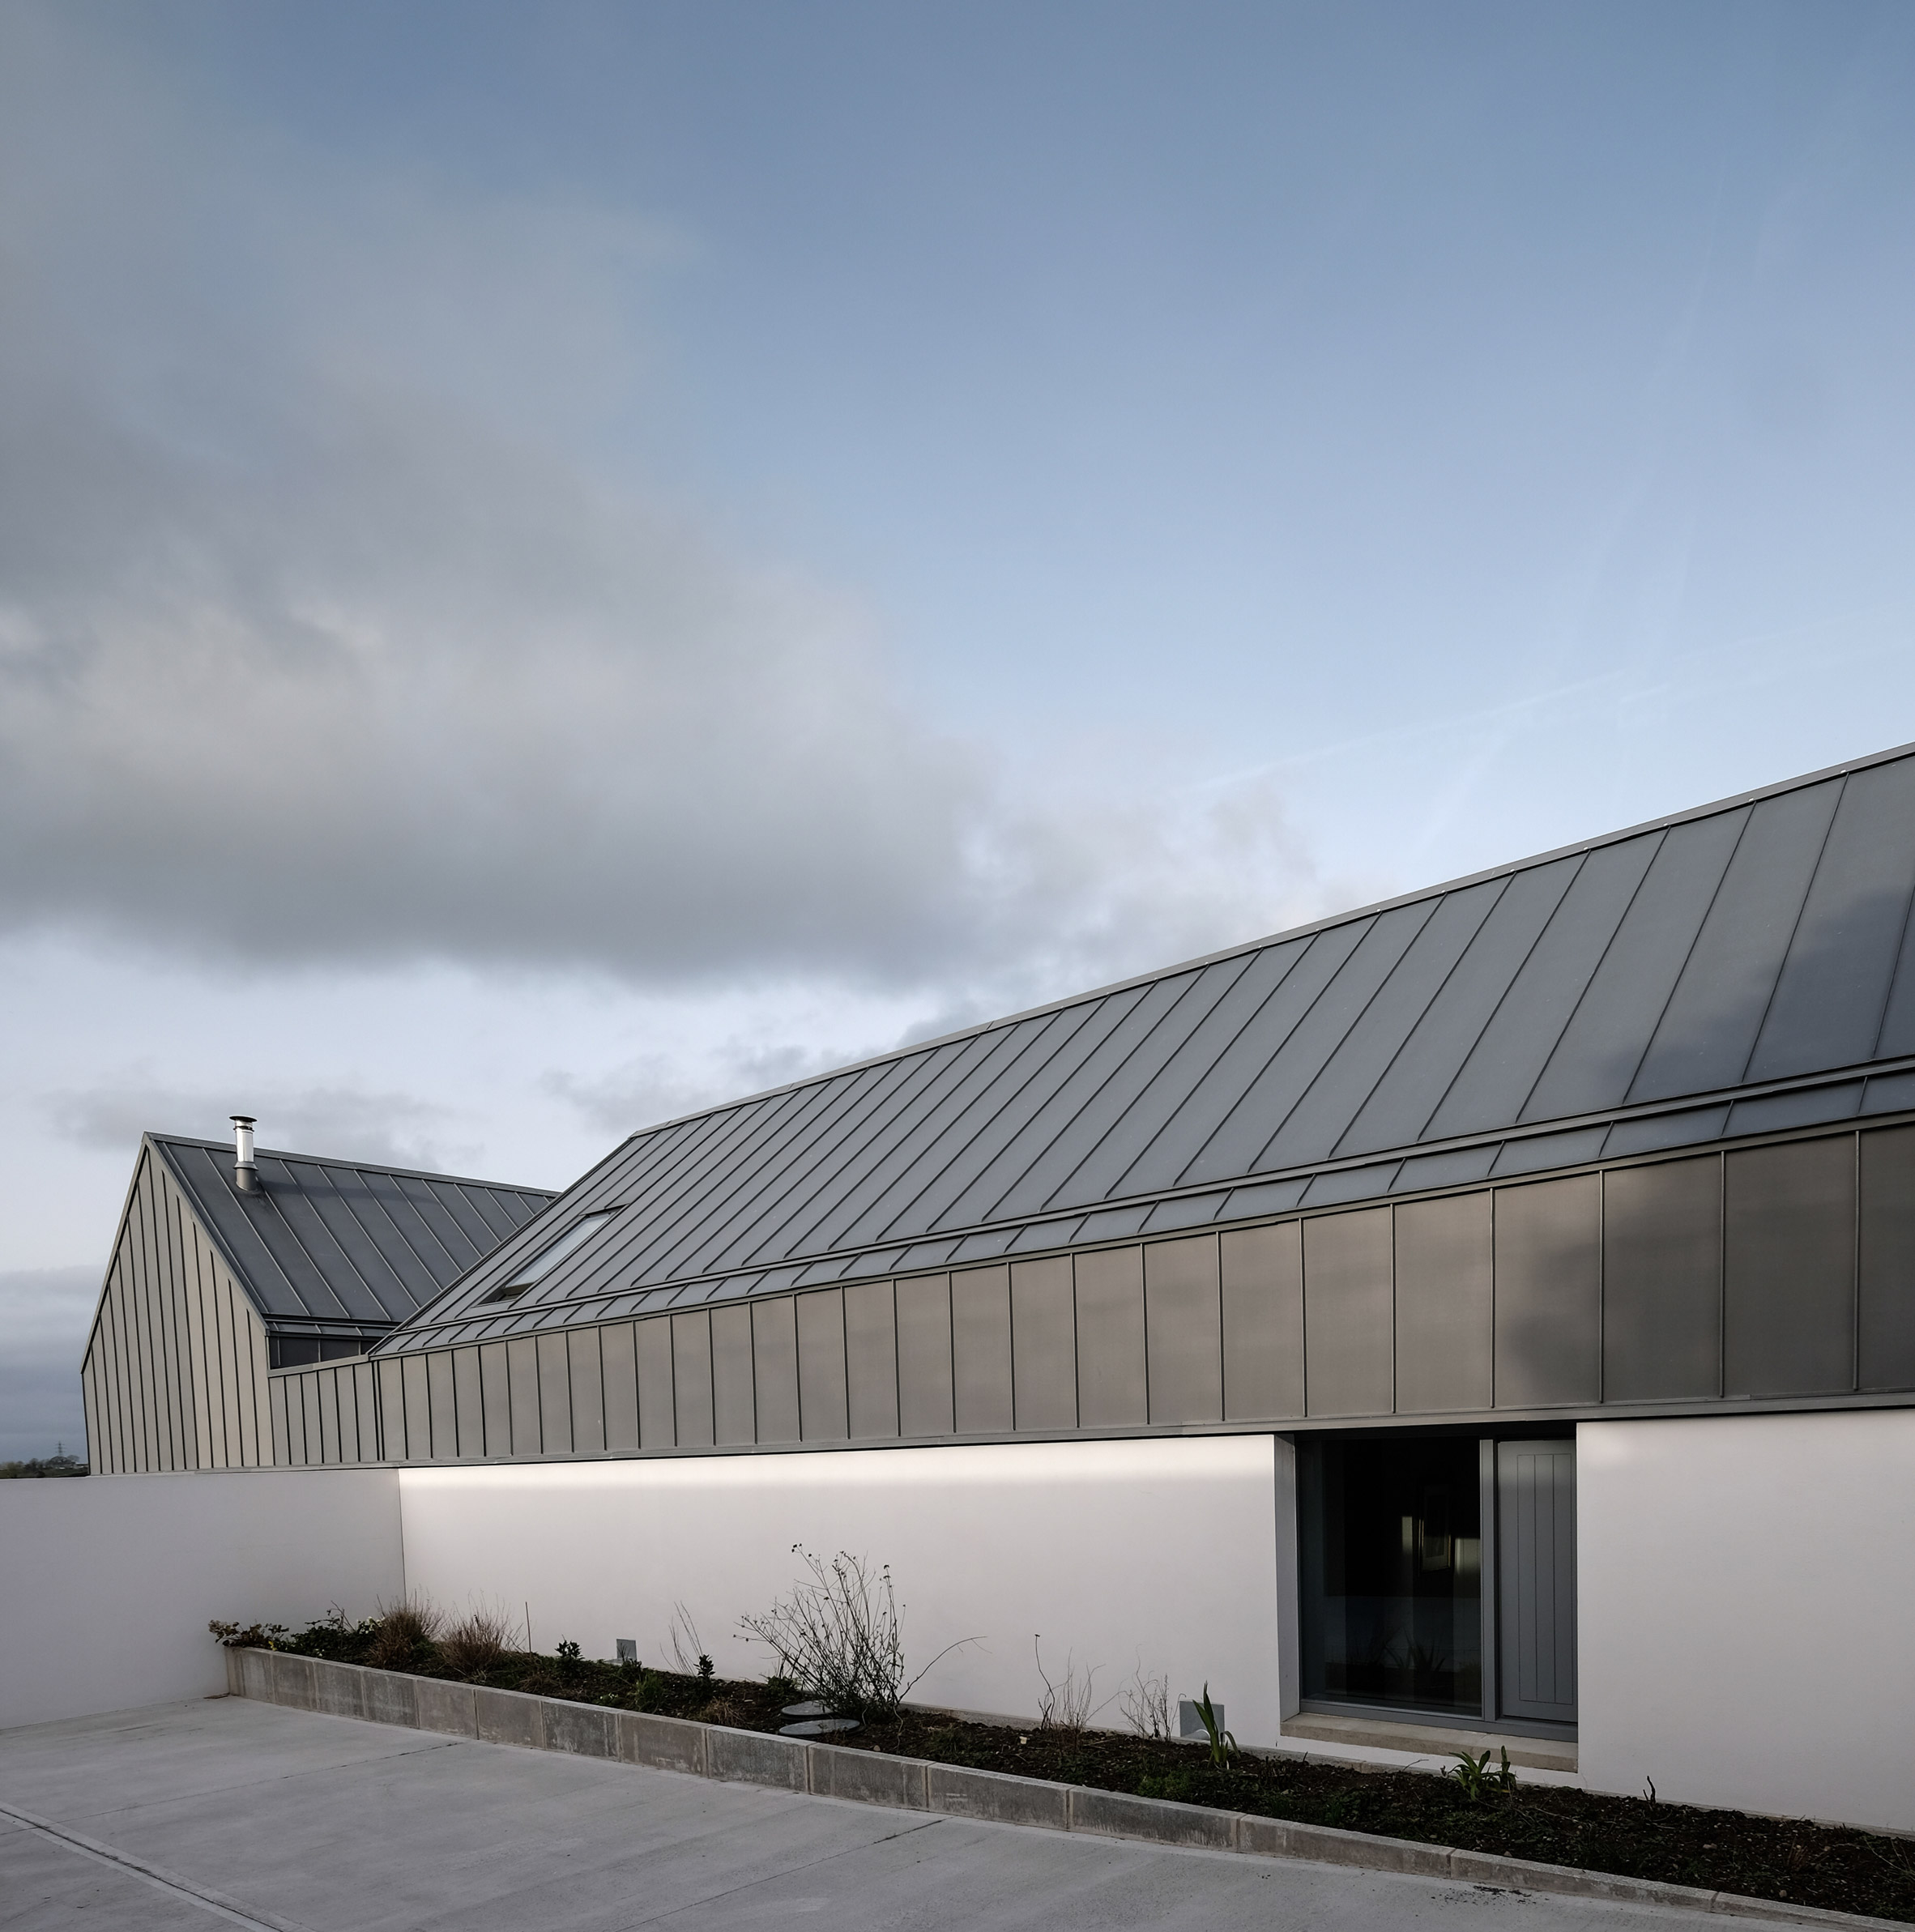 RIBA House of the Year 2019: House Lessans by McGonigle McGrath in Northern Ireland